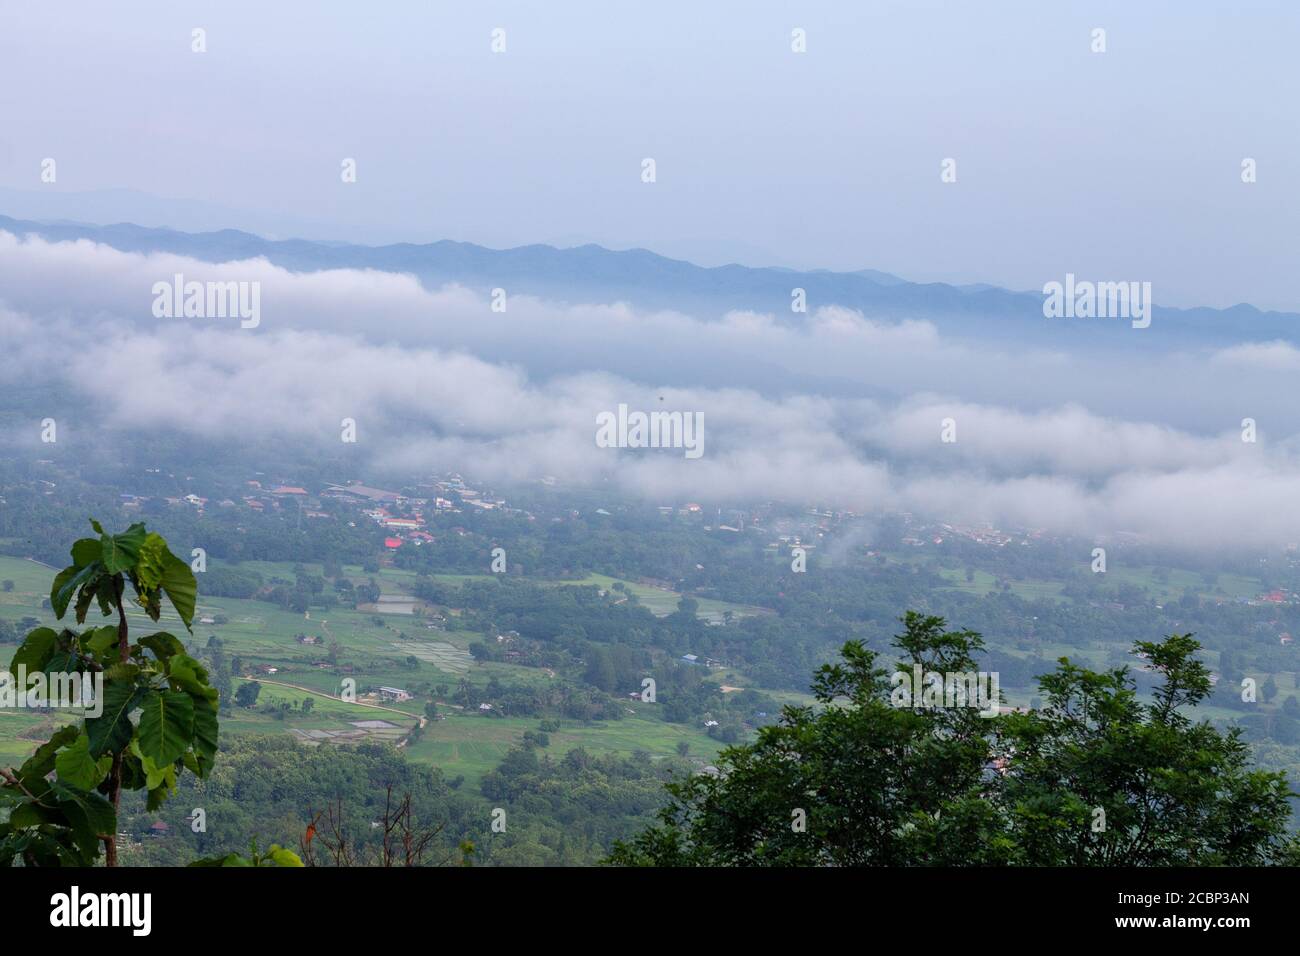 Landscape lot of fog.Fog cover the mountain forest. Stock Photo